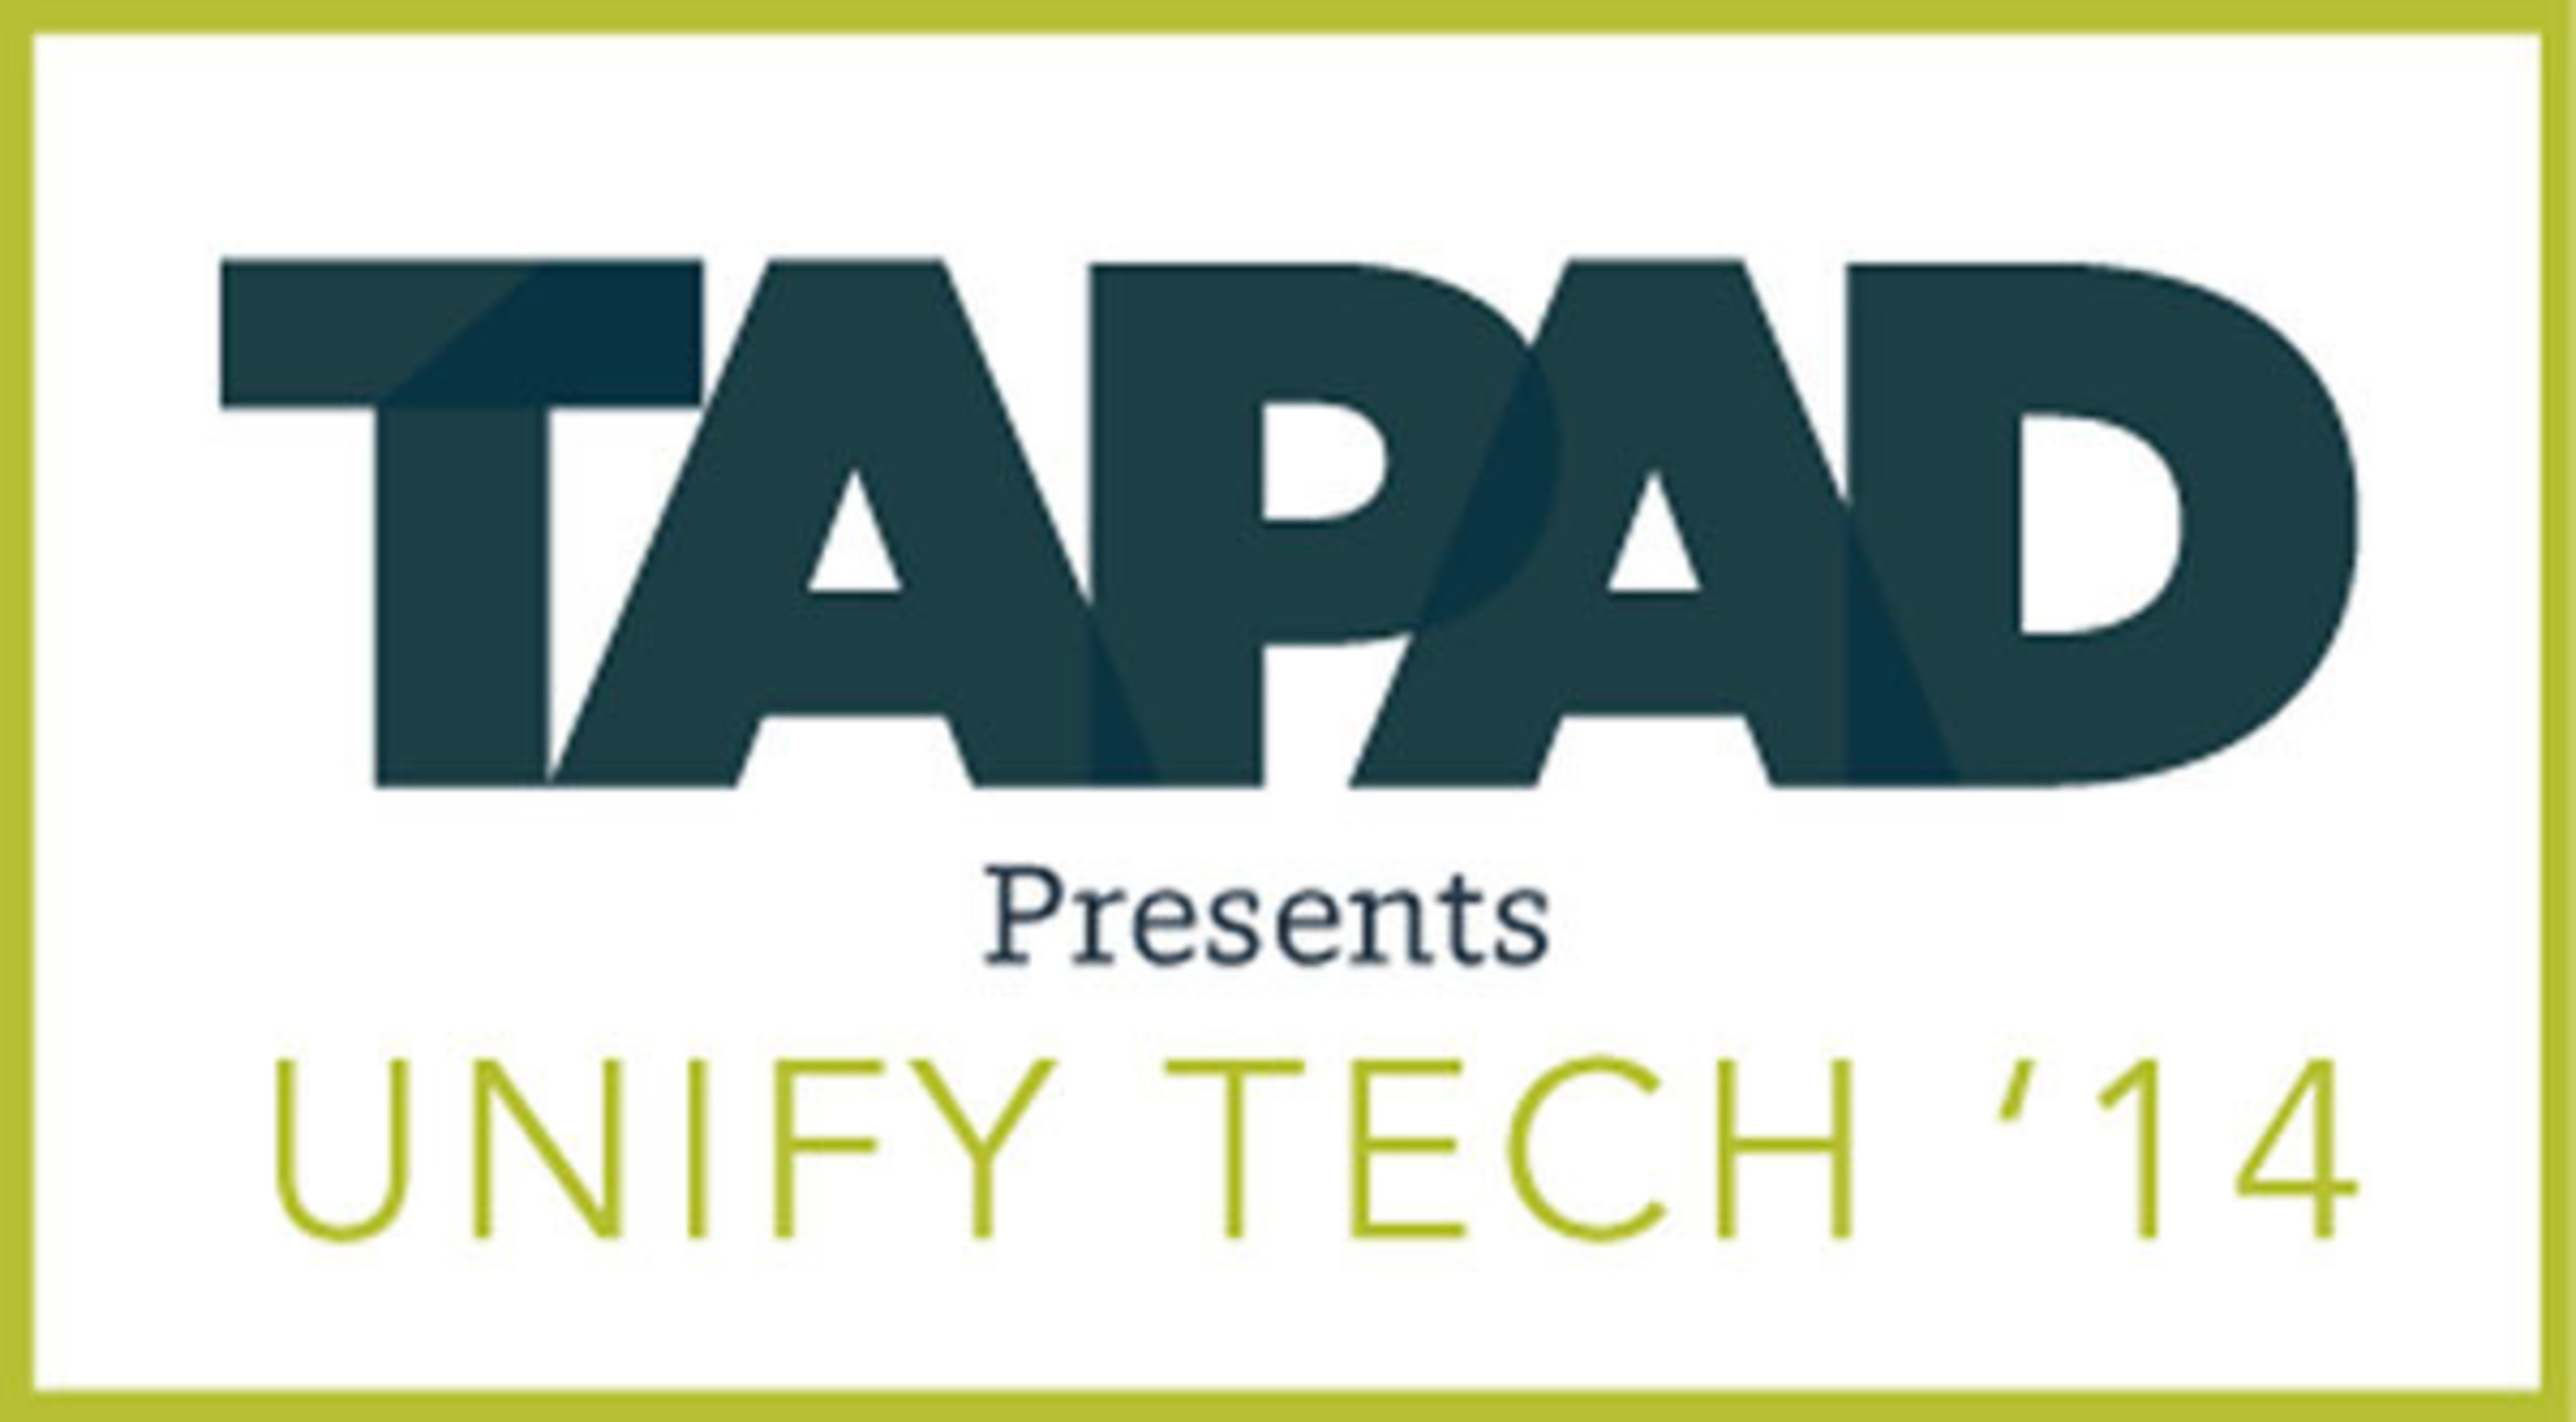 Tapad unveiled findings from Forrester Consulting at Unify Tech '14 on April 29 in New York City. (PRNewsFoto/Tapad)